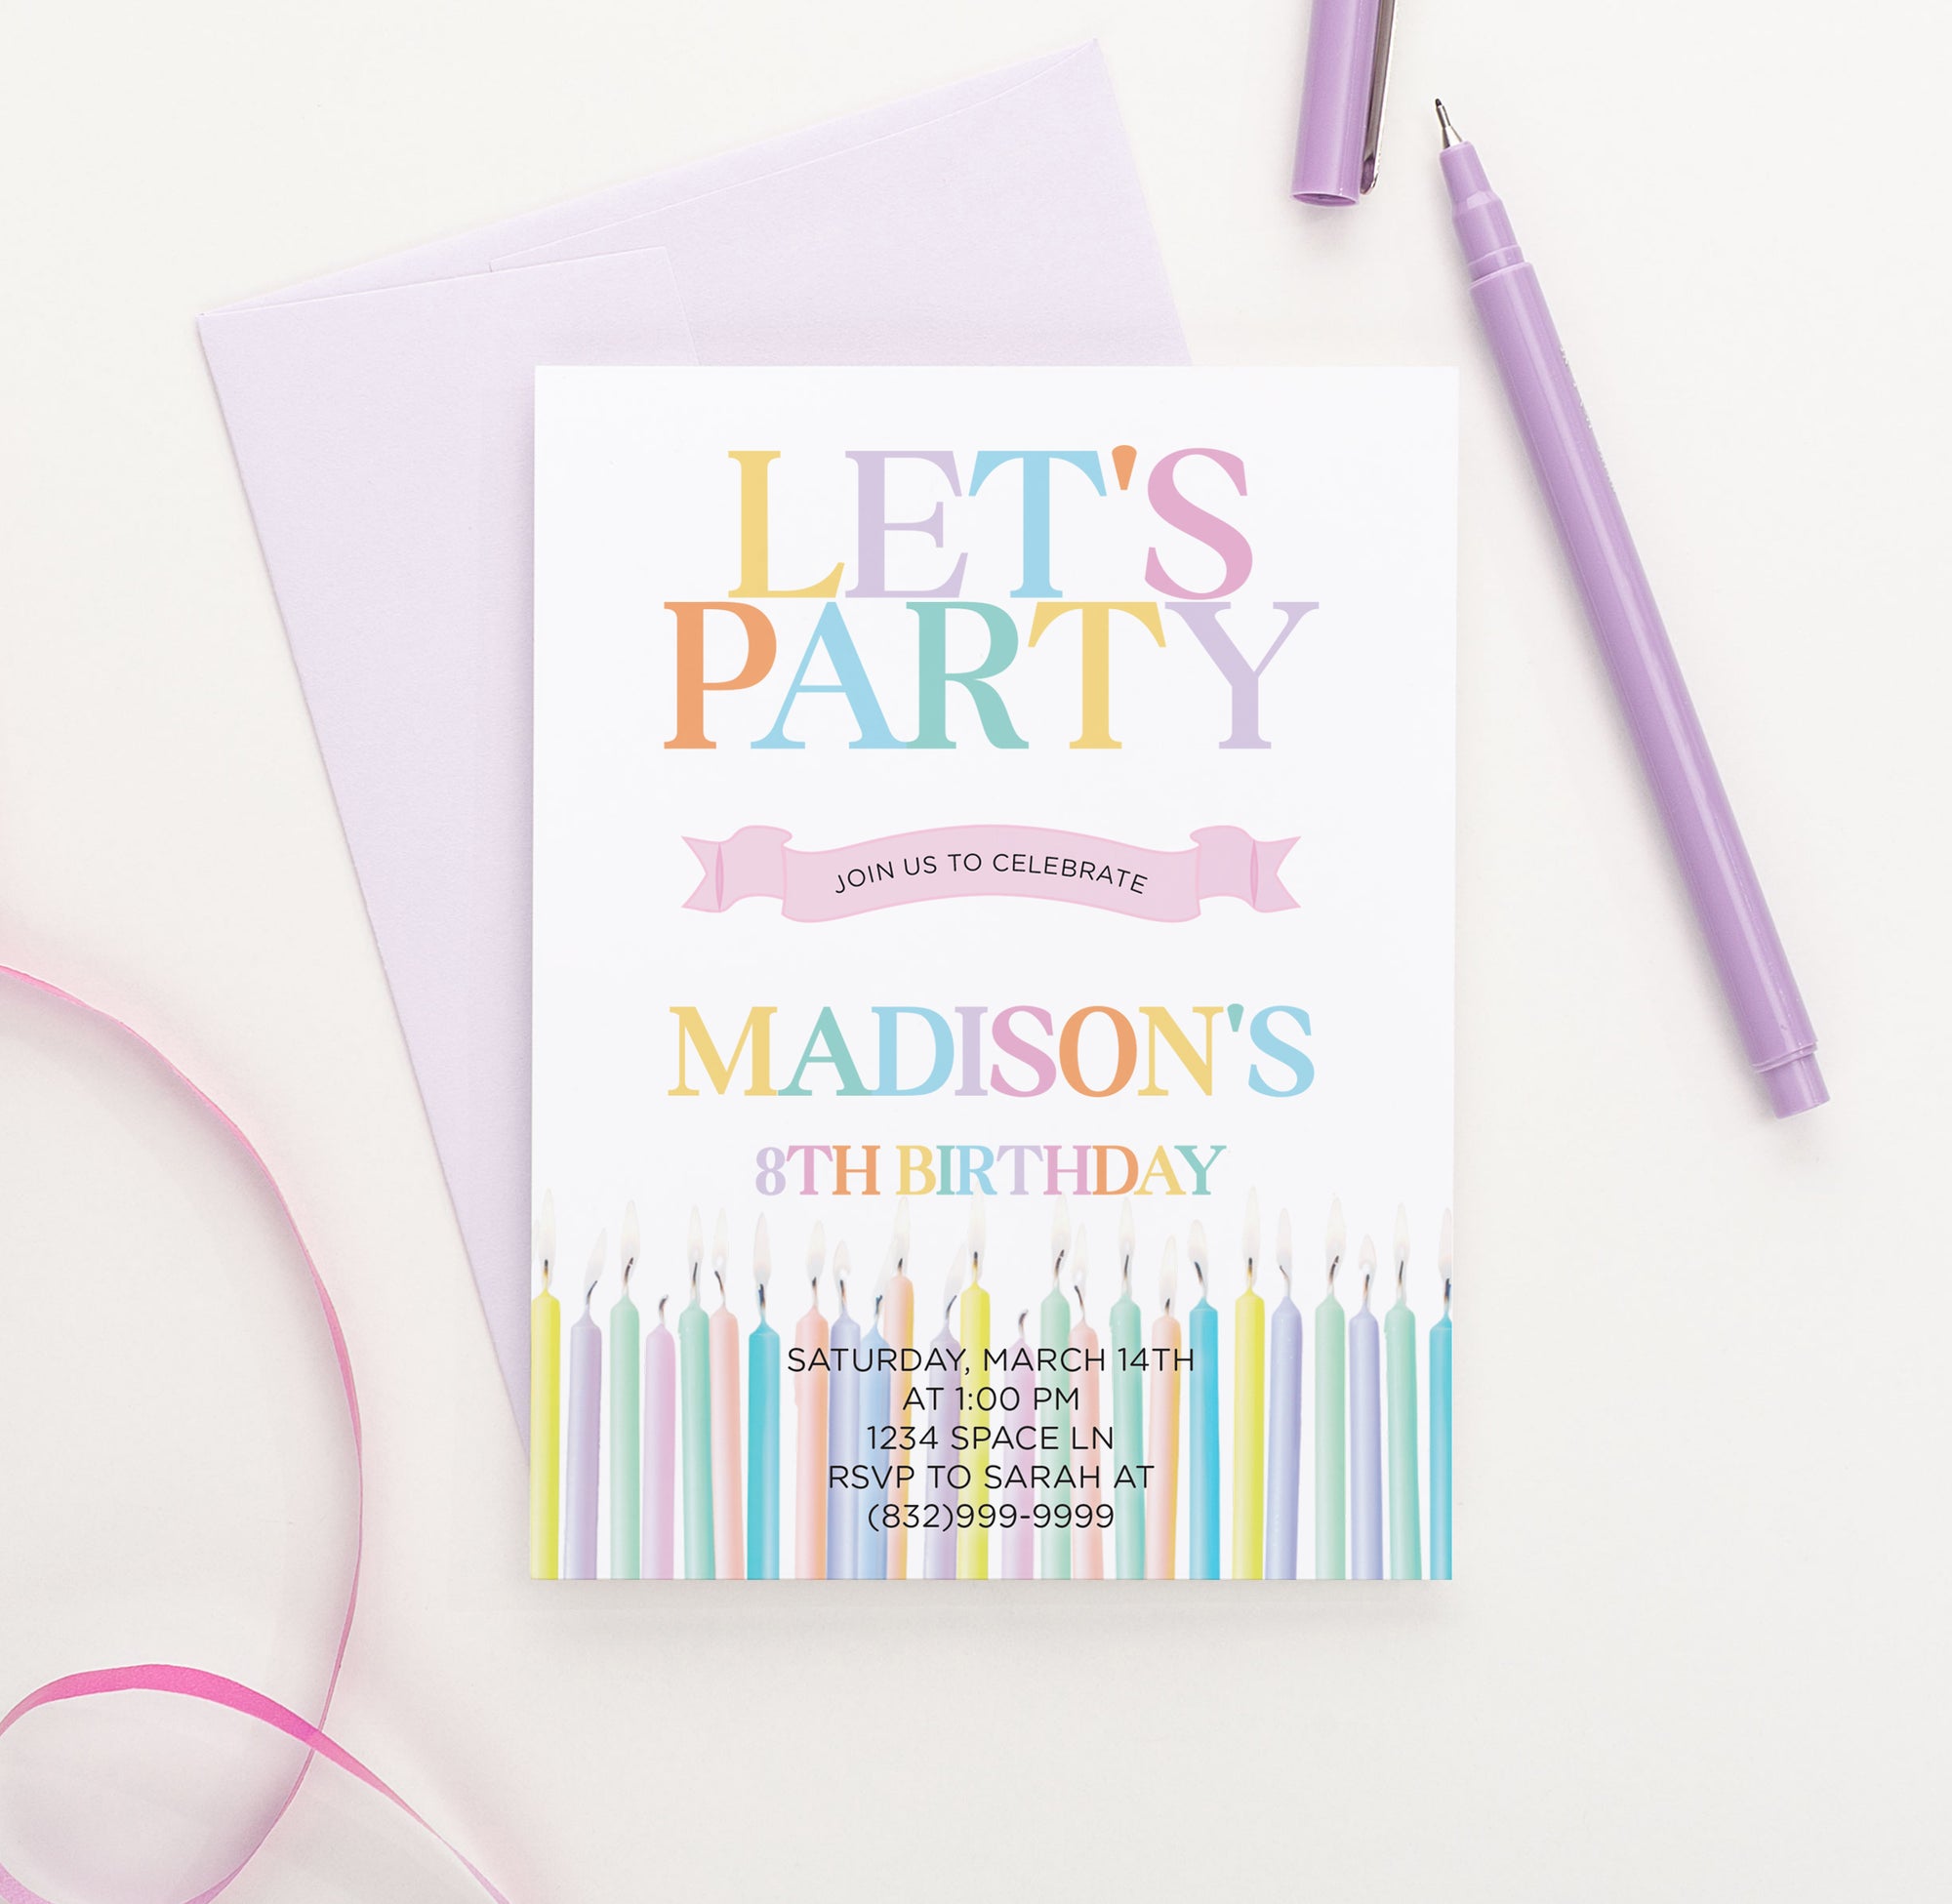 Personalized Let's Party Invitation With Candles For Girls